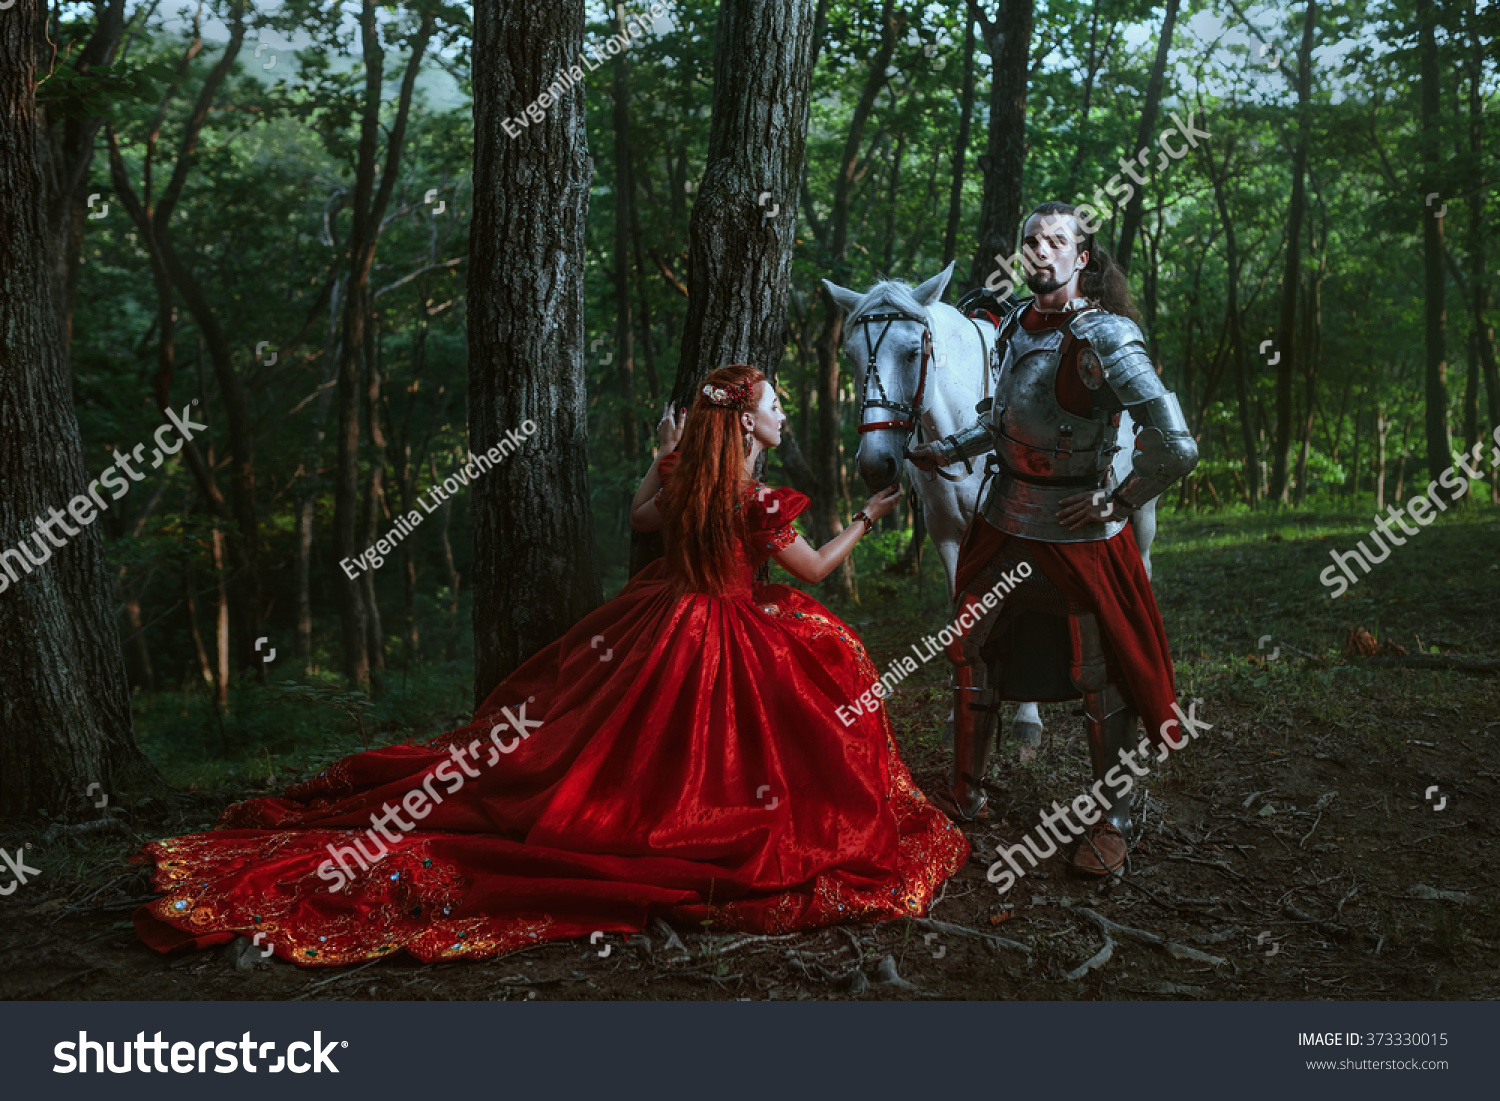 Medieval Knight Lady Stock Photo 373330015 - Shutterstock